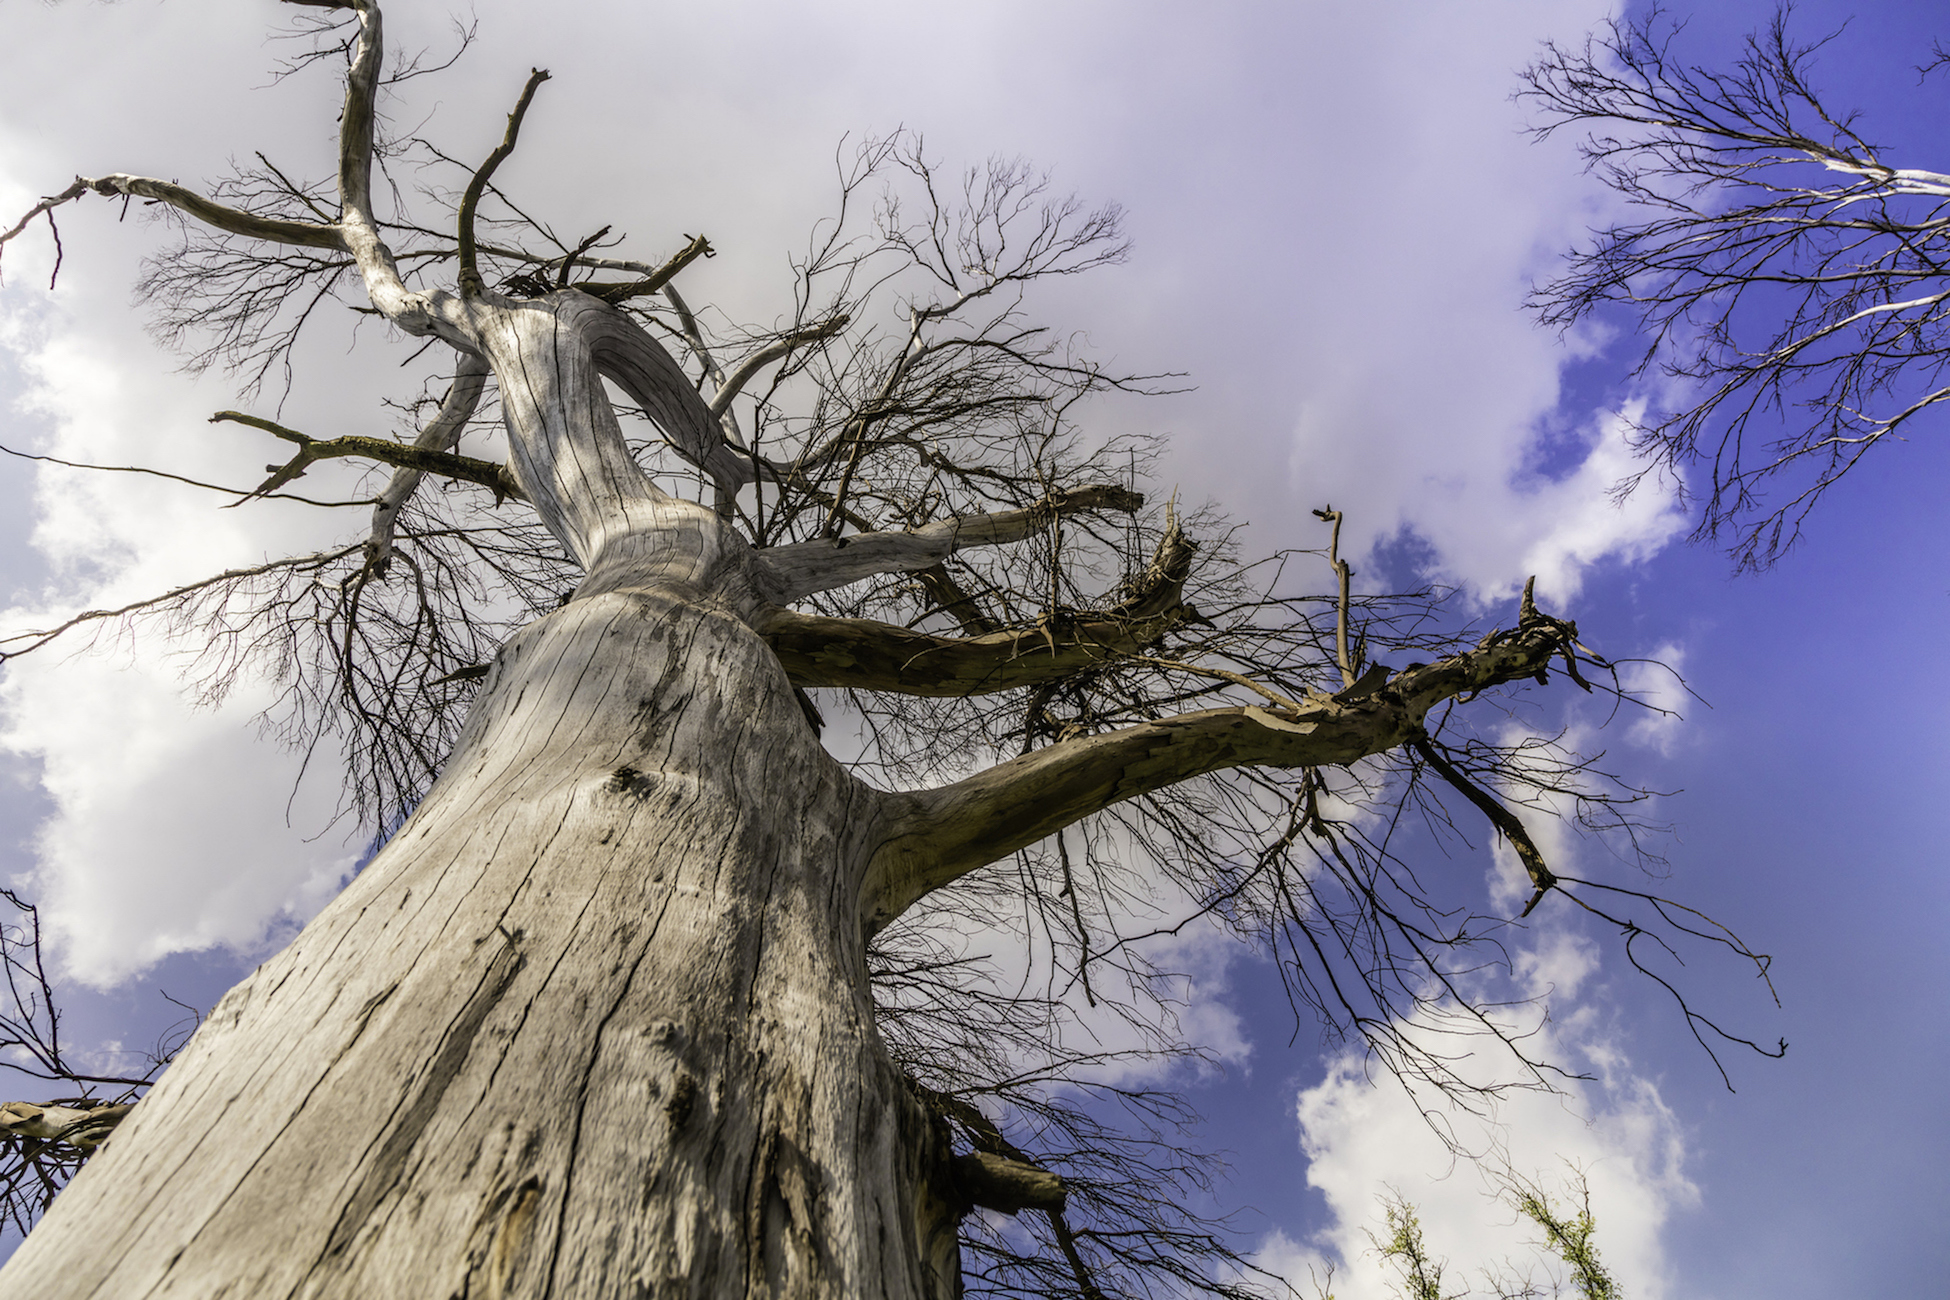 low angle view of large dying tree with brittle trunk and bare branches